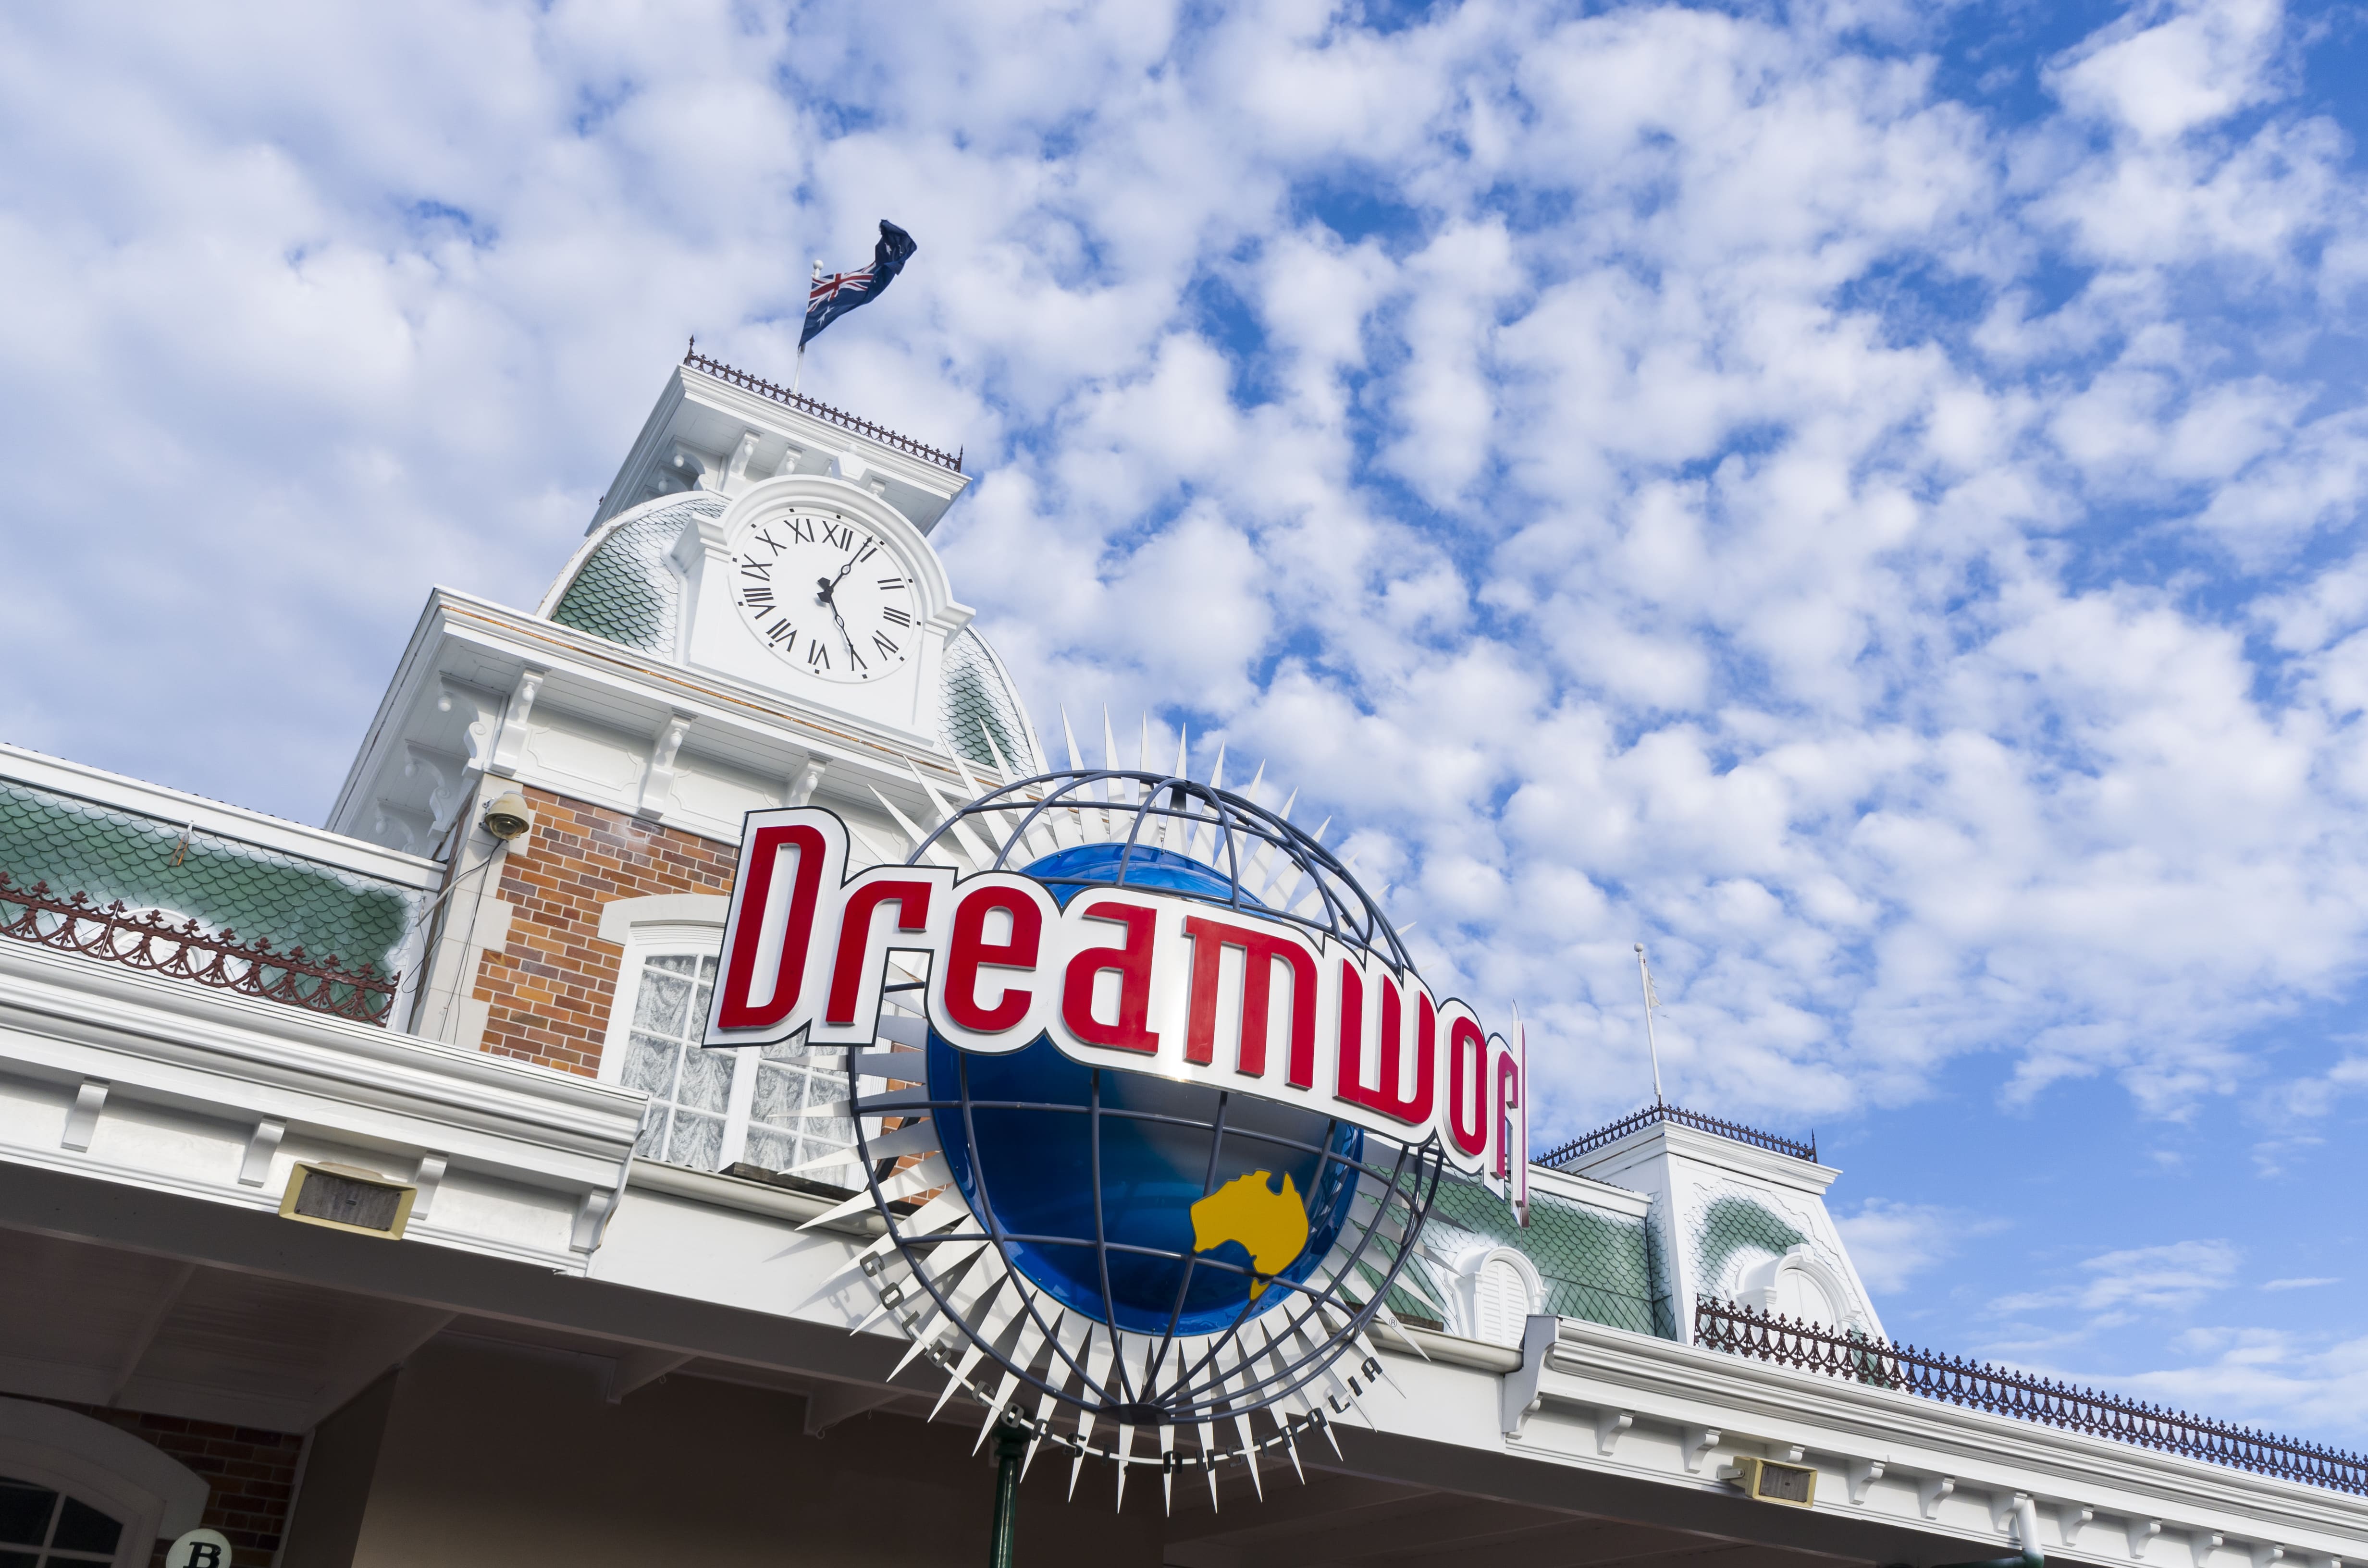 Visit Dream World and many other theme parks when you move from Adelaide to Cold Coast with Richard mitchell removalists